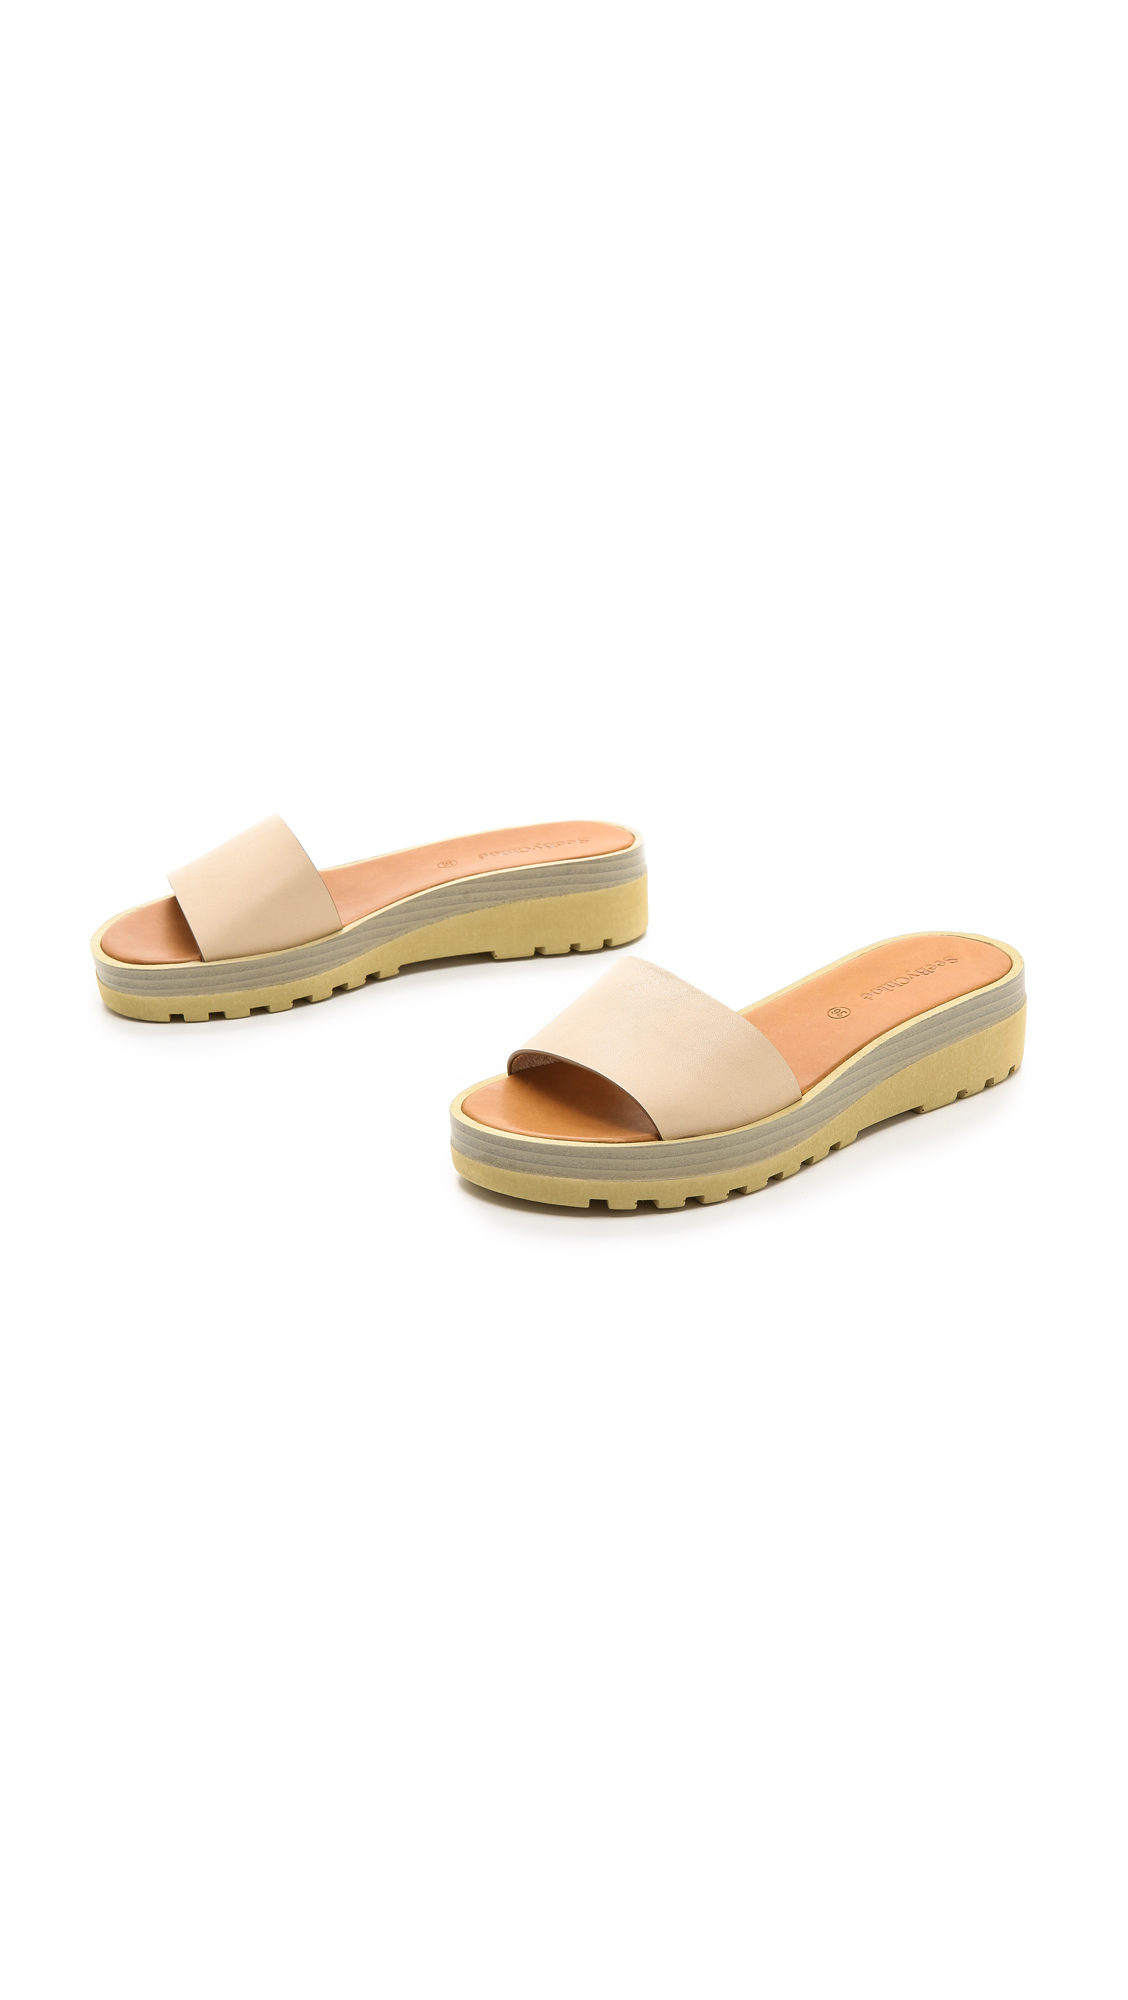 Lyst - See By Chloé Slide Sandals in Natural